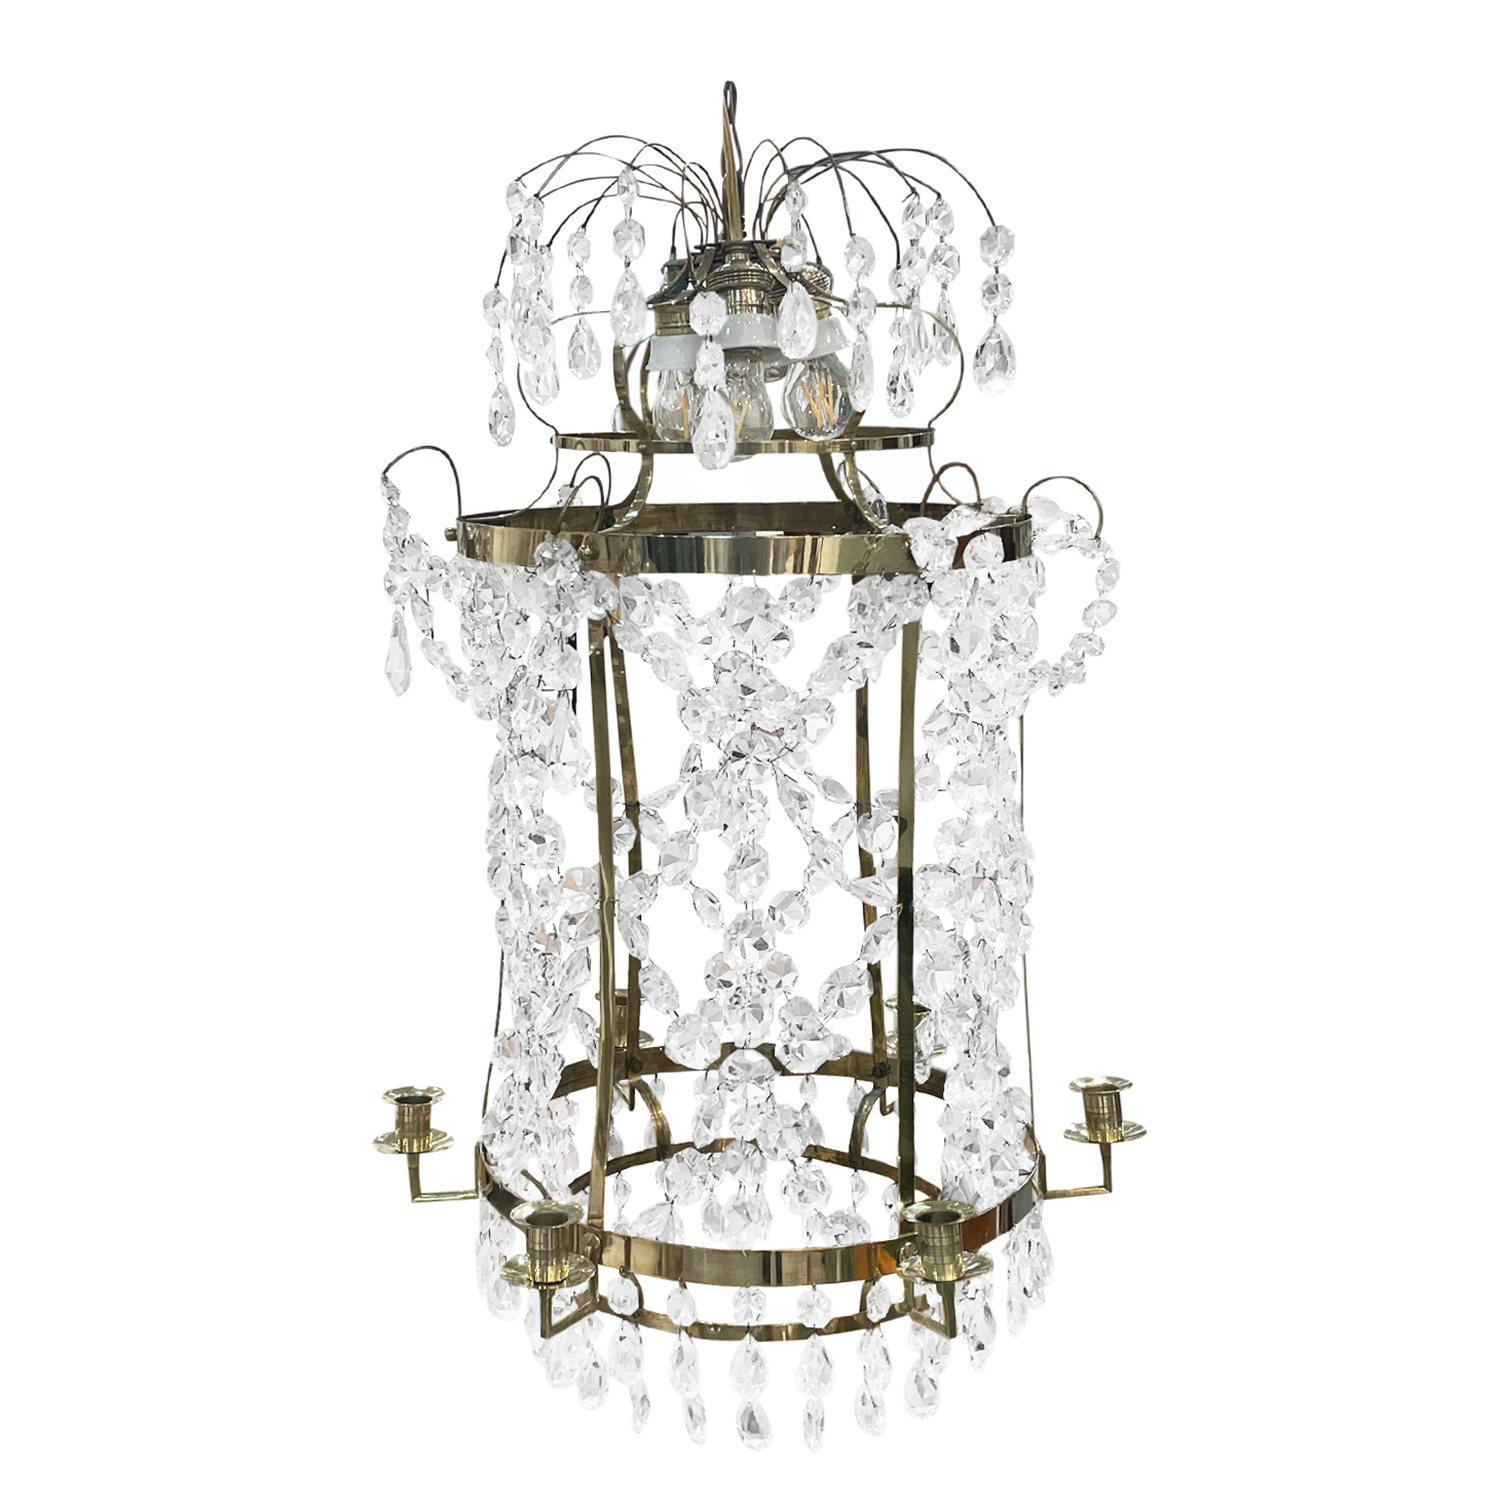 19th Century French Antique Empire Crystal Glass Chandelier